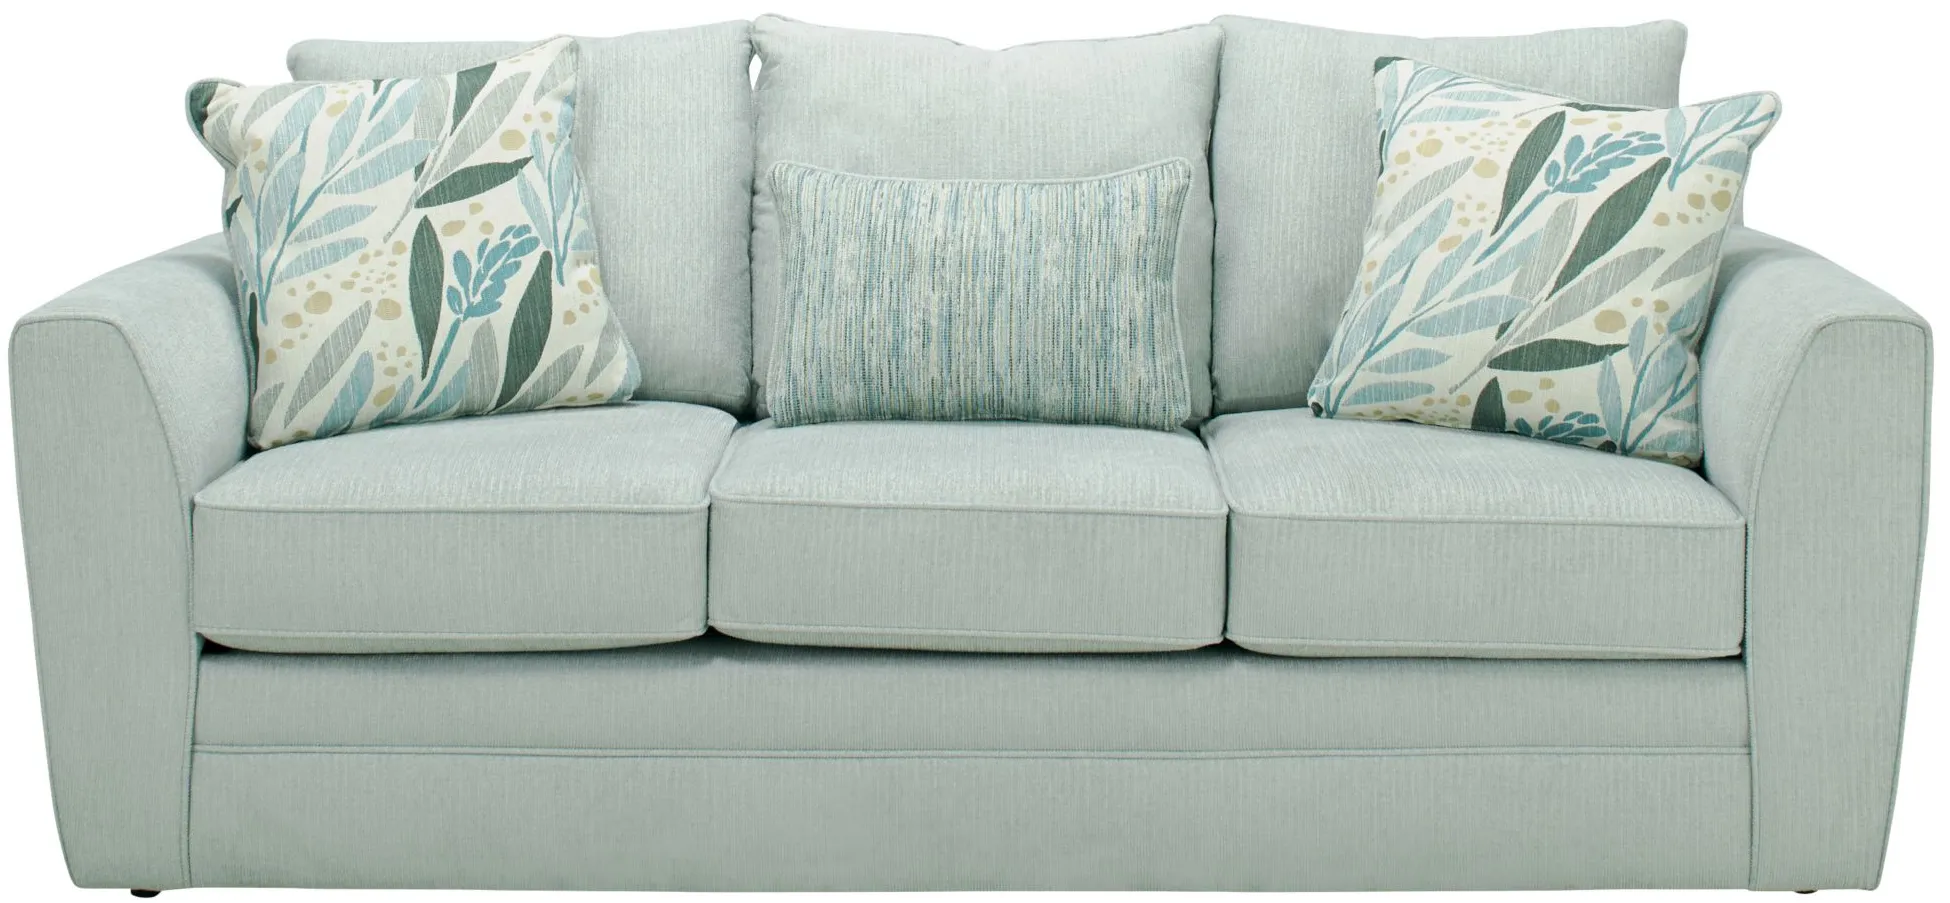 Meadow Sofa in First Times Seafoam by Fusion Furniture